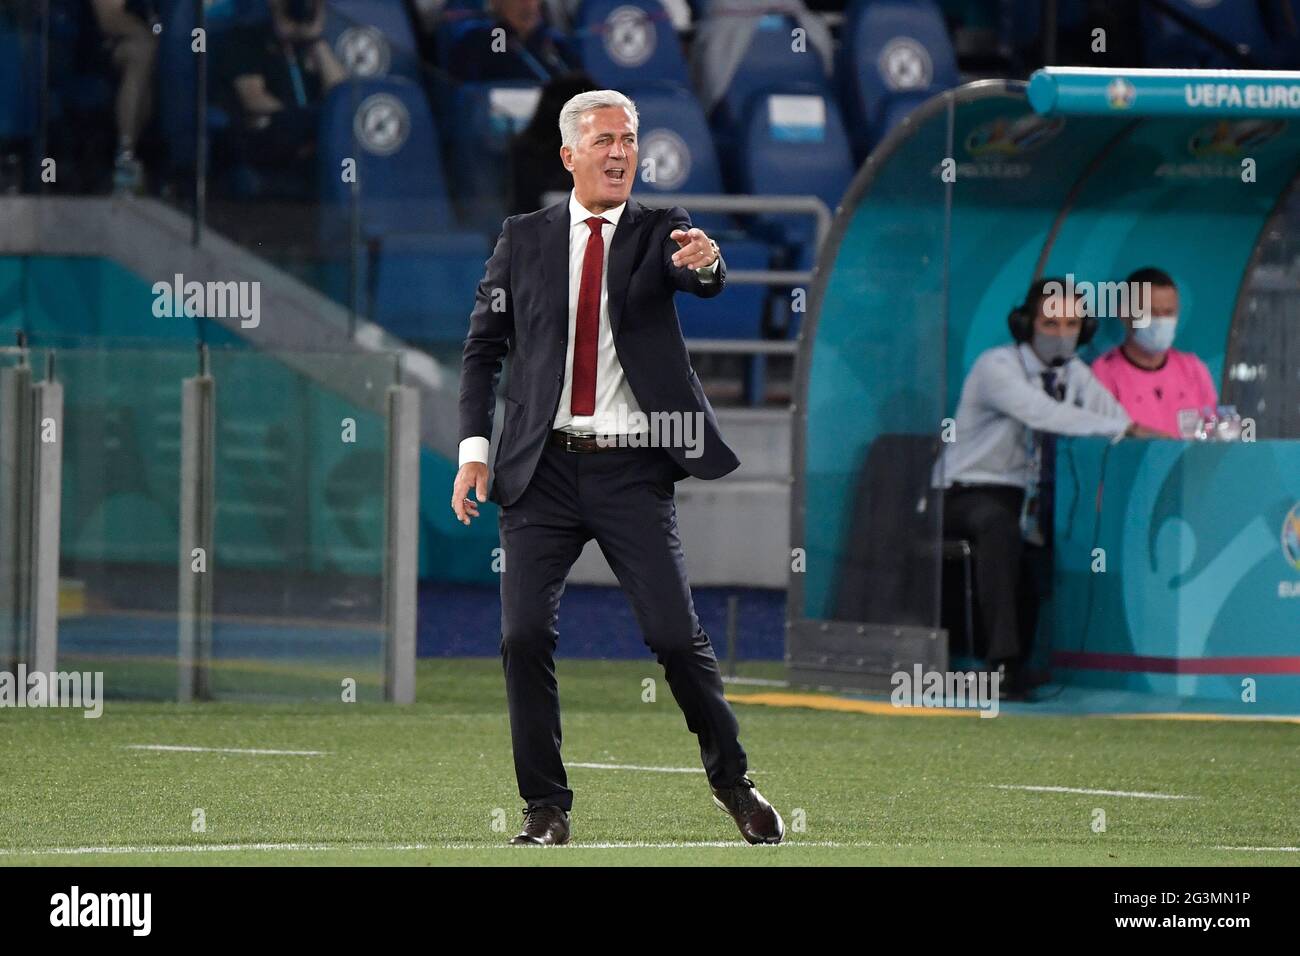 Roma, Italy. 16th June, 2021. Vladimir Petkovic coach of Switzerland during the Uefa Euro 2020 Group stage - Group A football match between Italy and Switzerland at stadio Olimpico in Rome (Italy), June 16th, 2021. Photo Andrea Staccioli/Insidefoto Credit: insidefoto srl/Alamy Live News Stock Photo